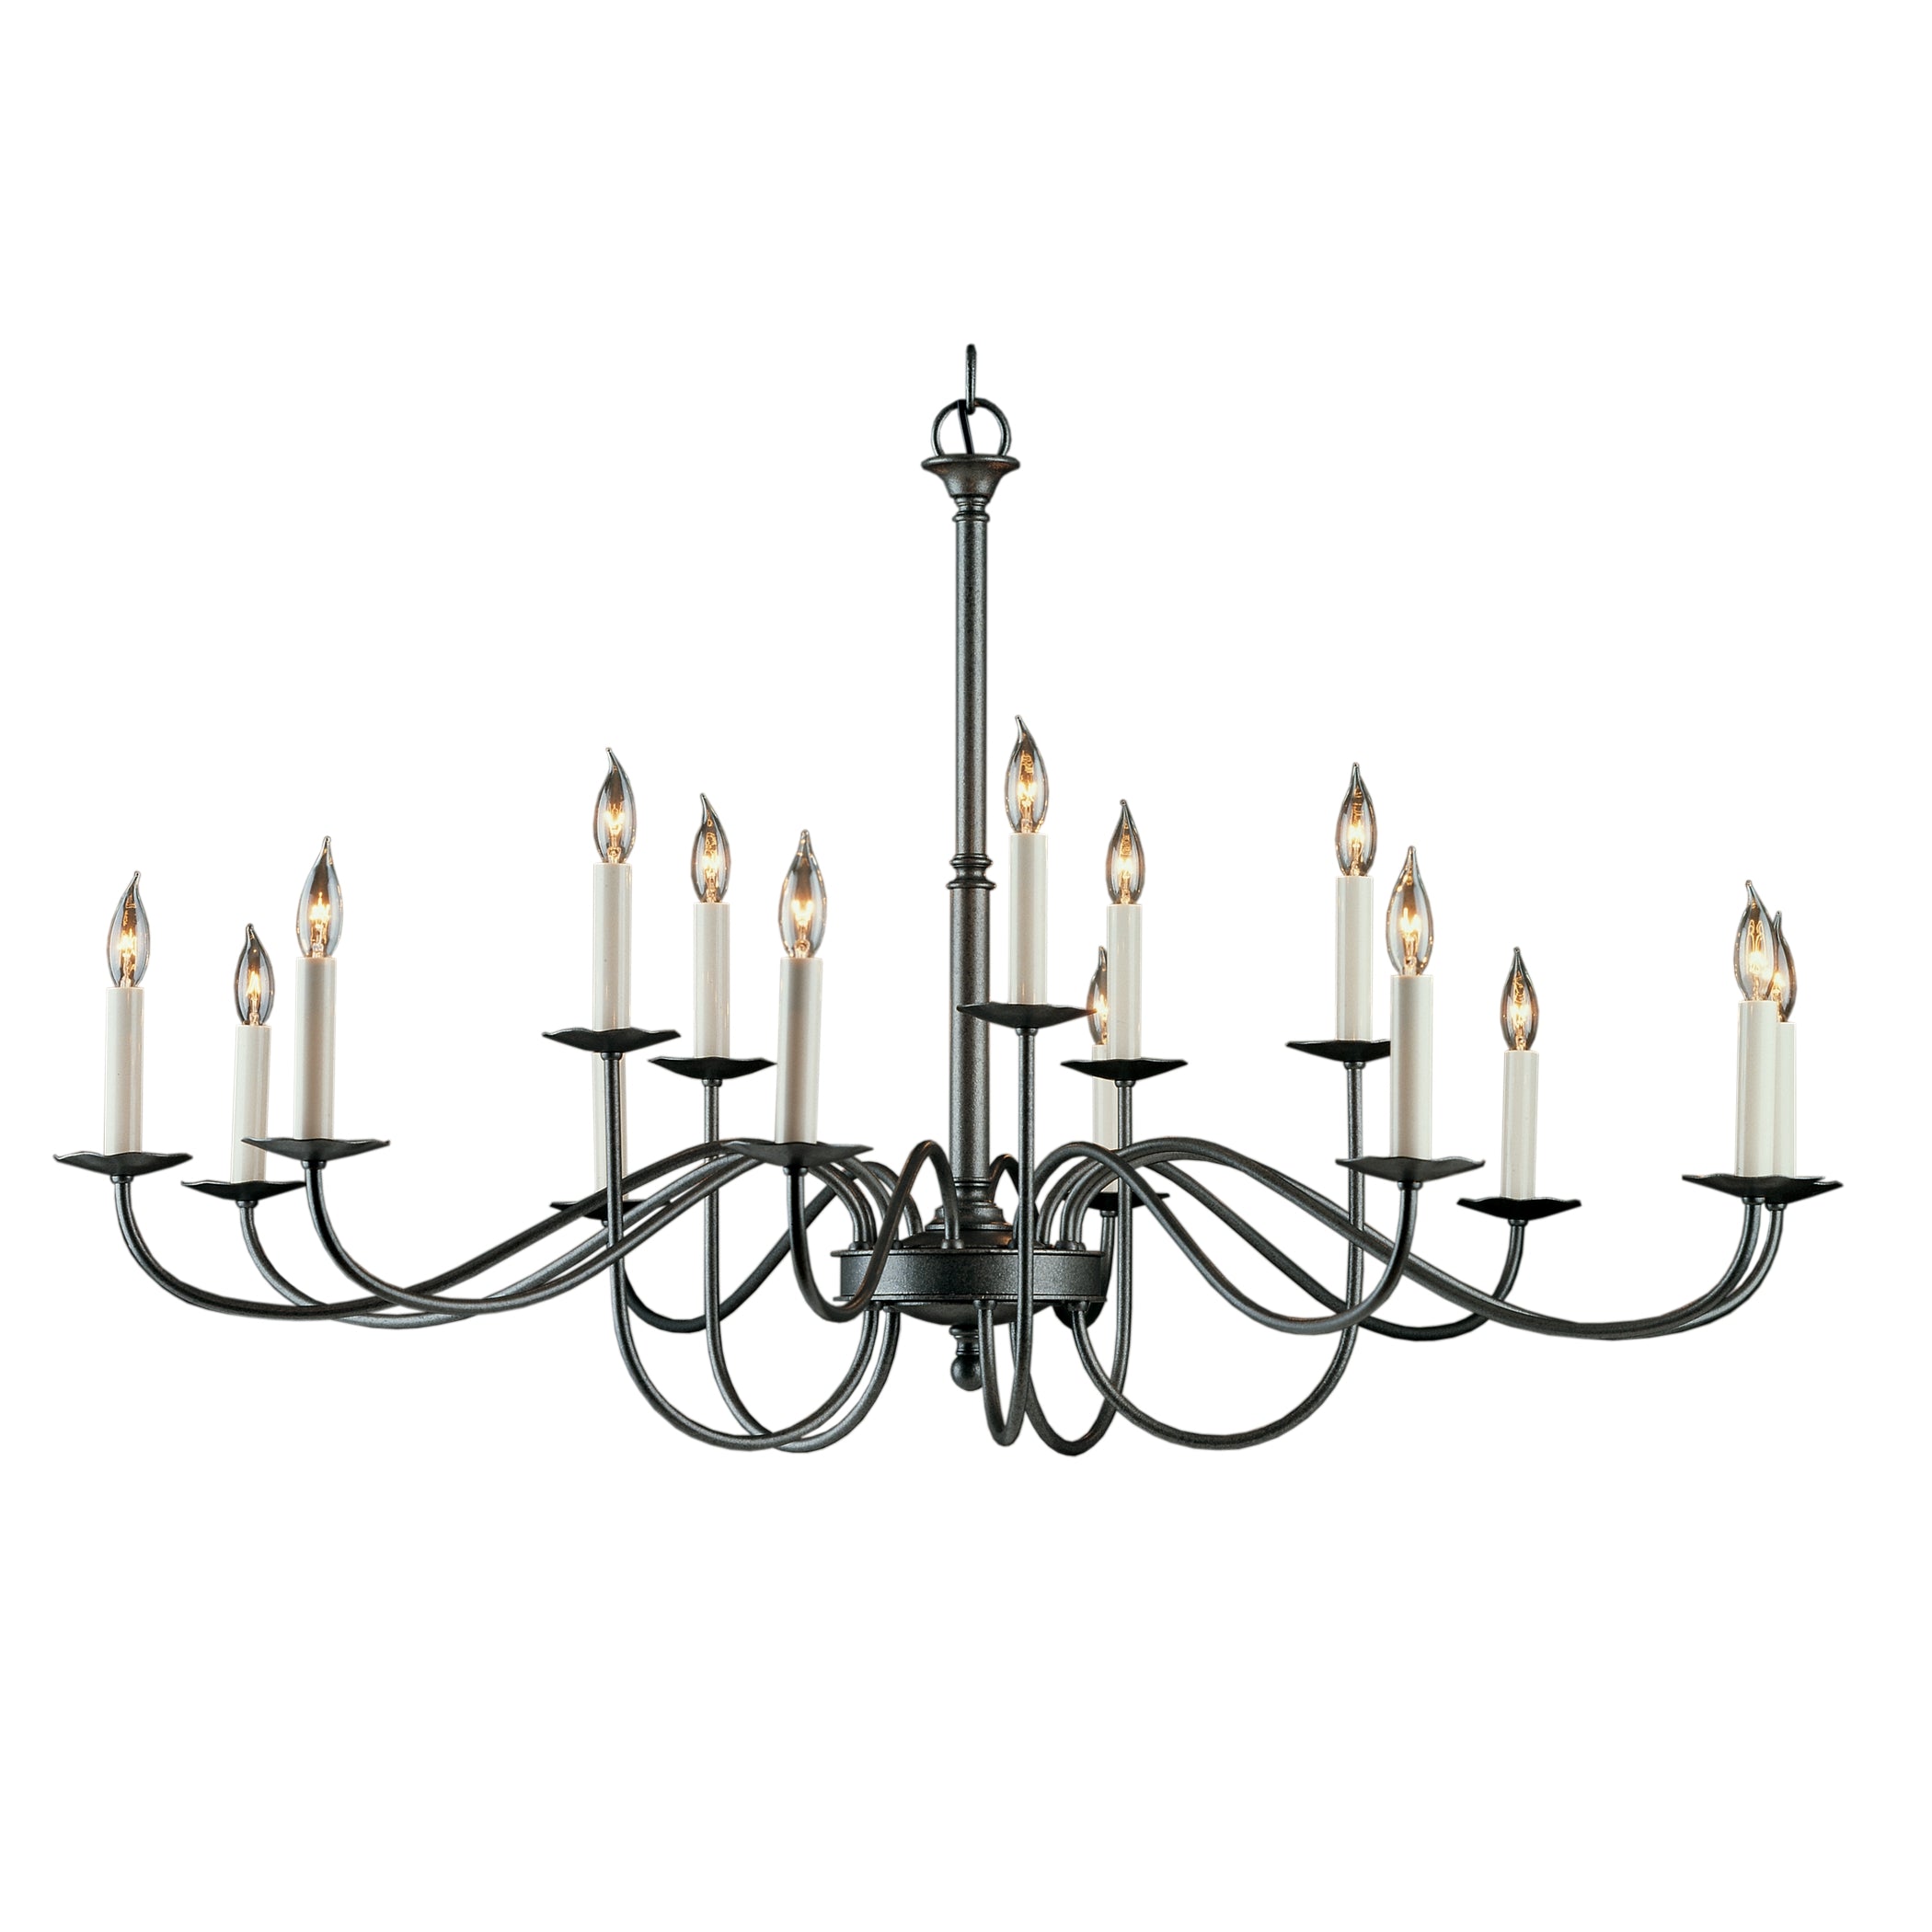 Simple Lines Chandelier Natural Iron (20)